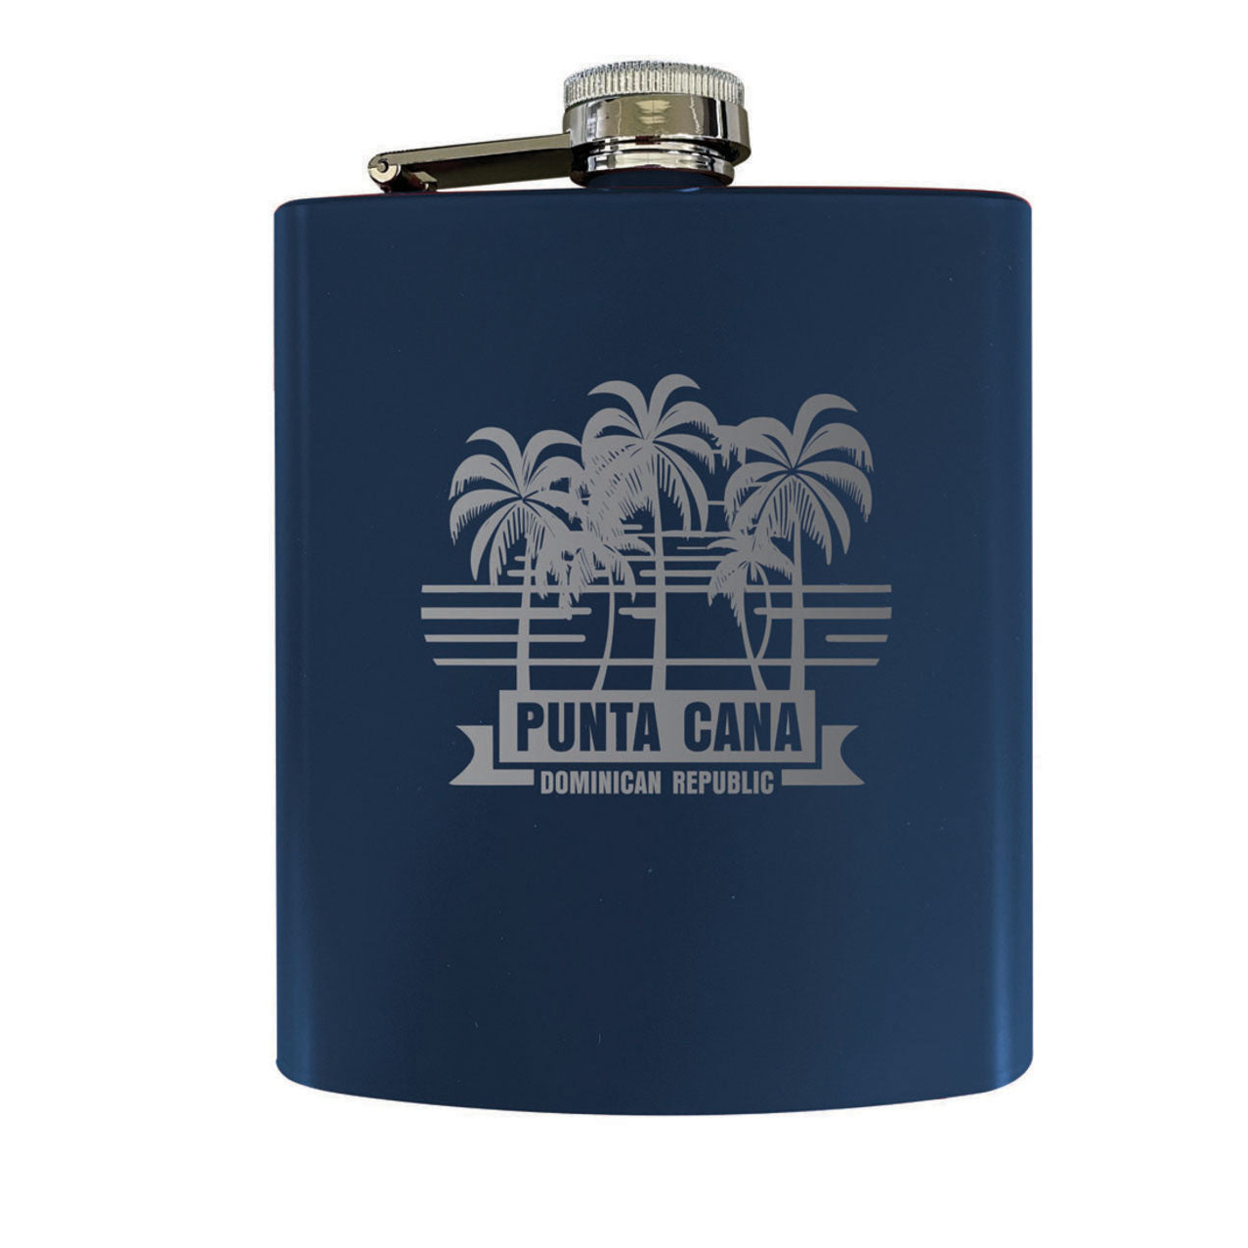 Punta Cana Dominican Republic Souvenir Engraved Matte Finish Stainless Steel 7 Oz Flask - Navy, PALMS